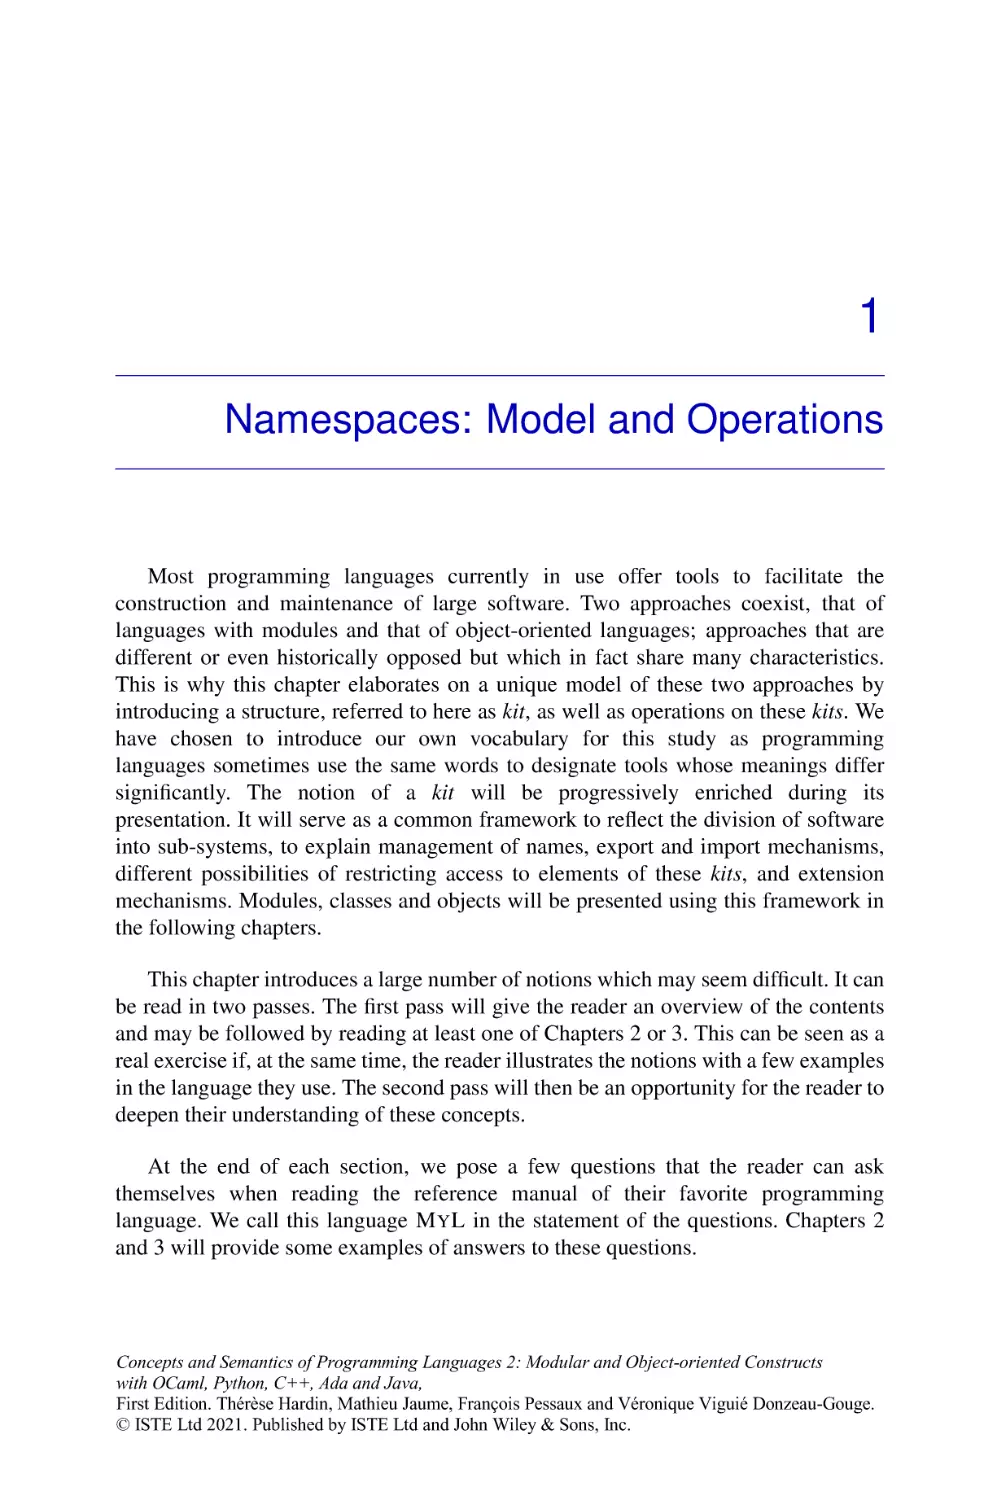 Chapter 1. Namespaces